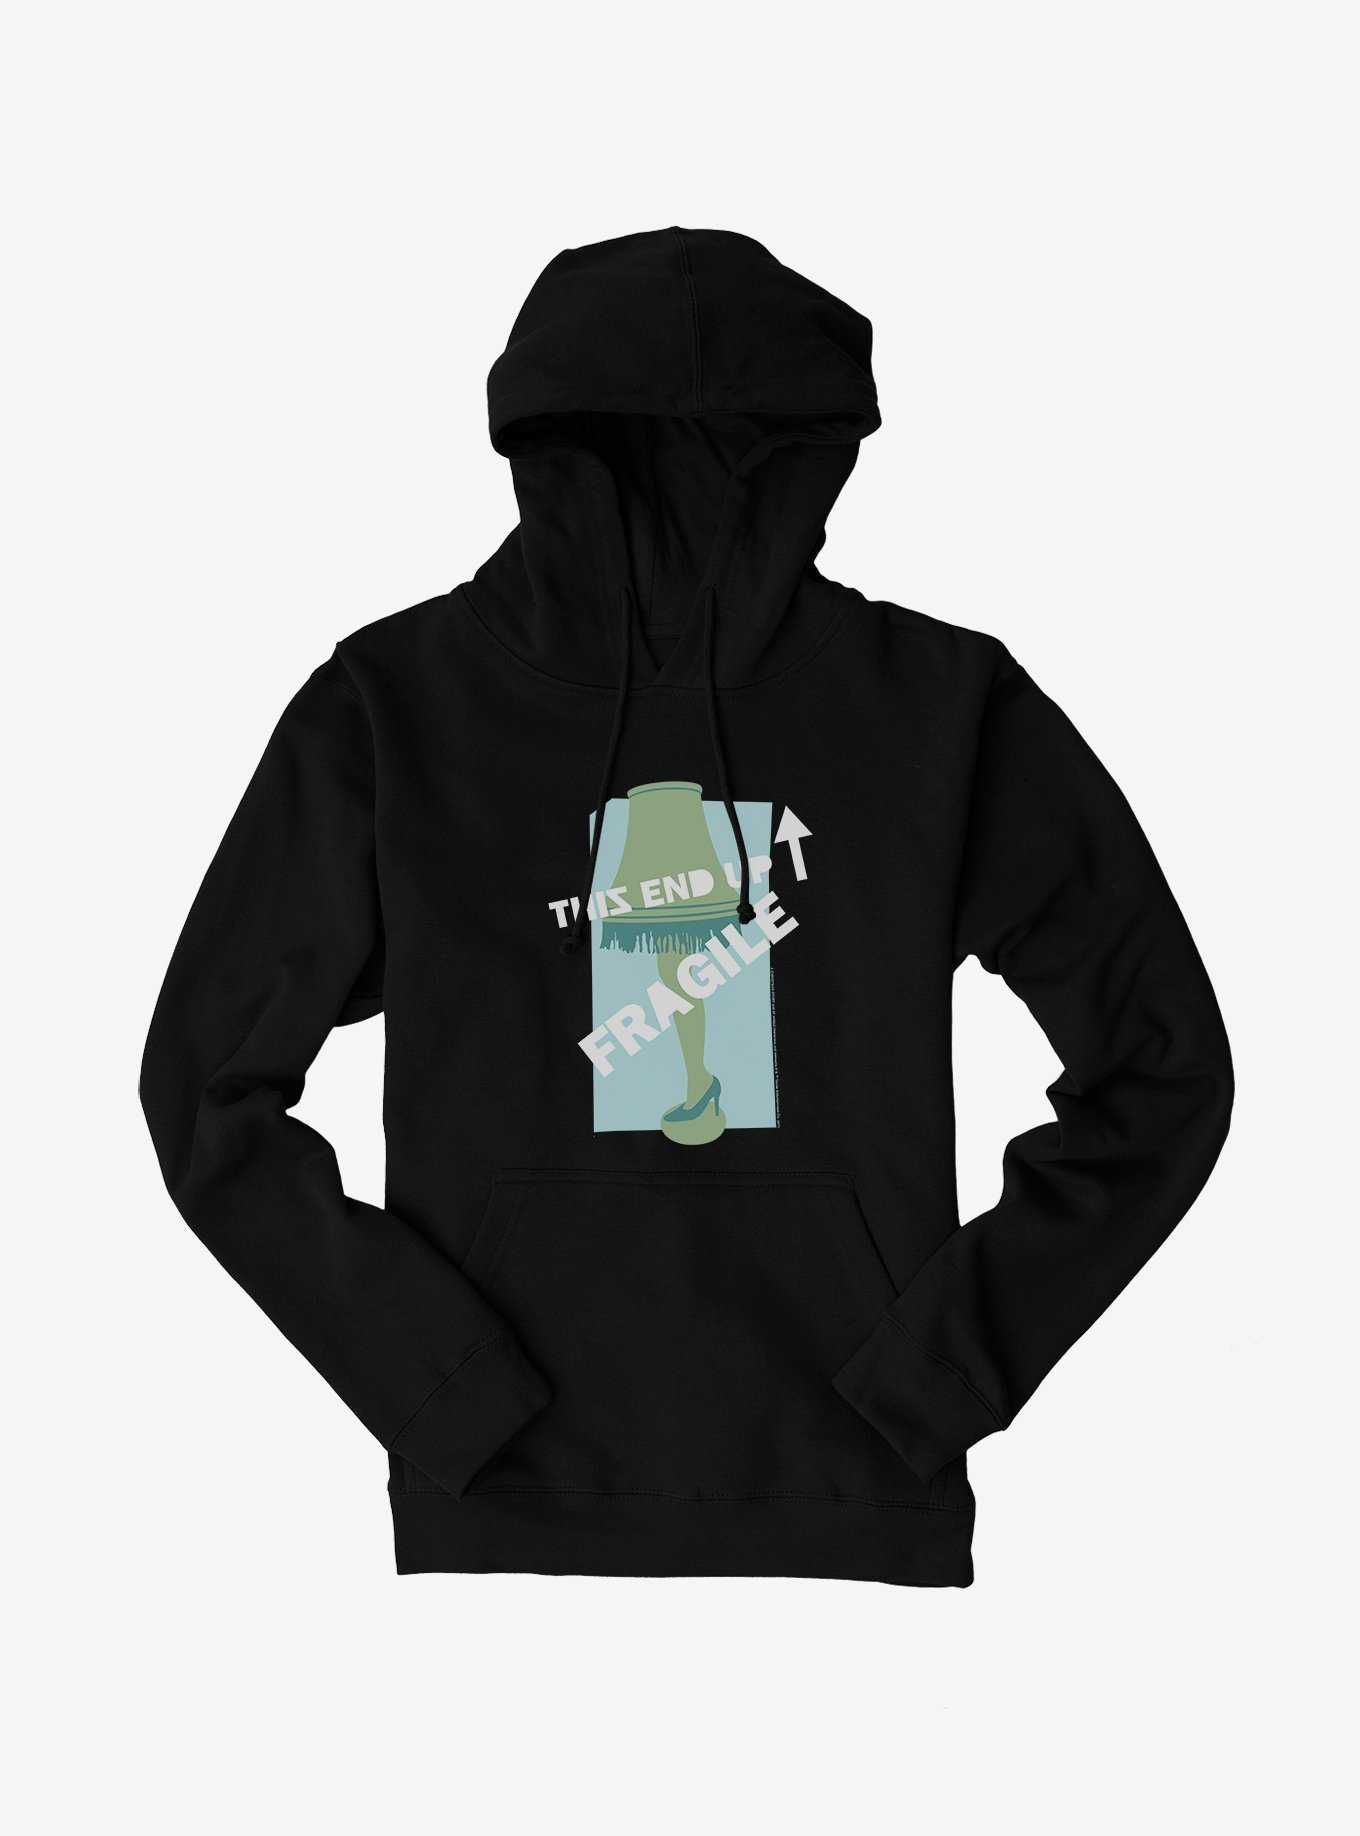 A Christmas Story This End Up Fragile  Hoodie, , hi-res